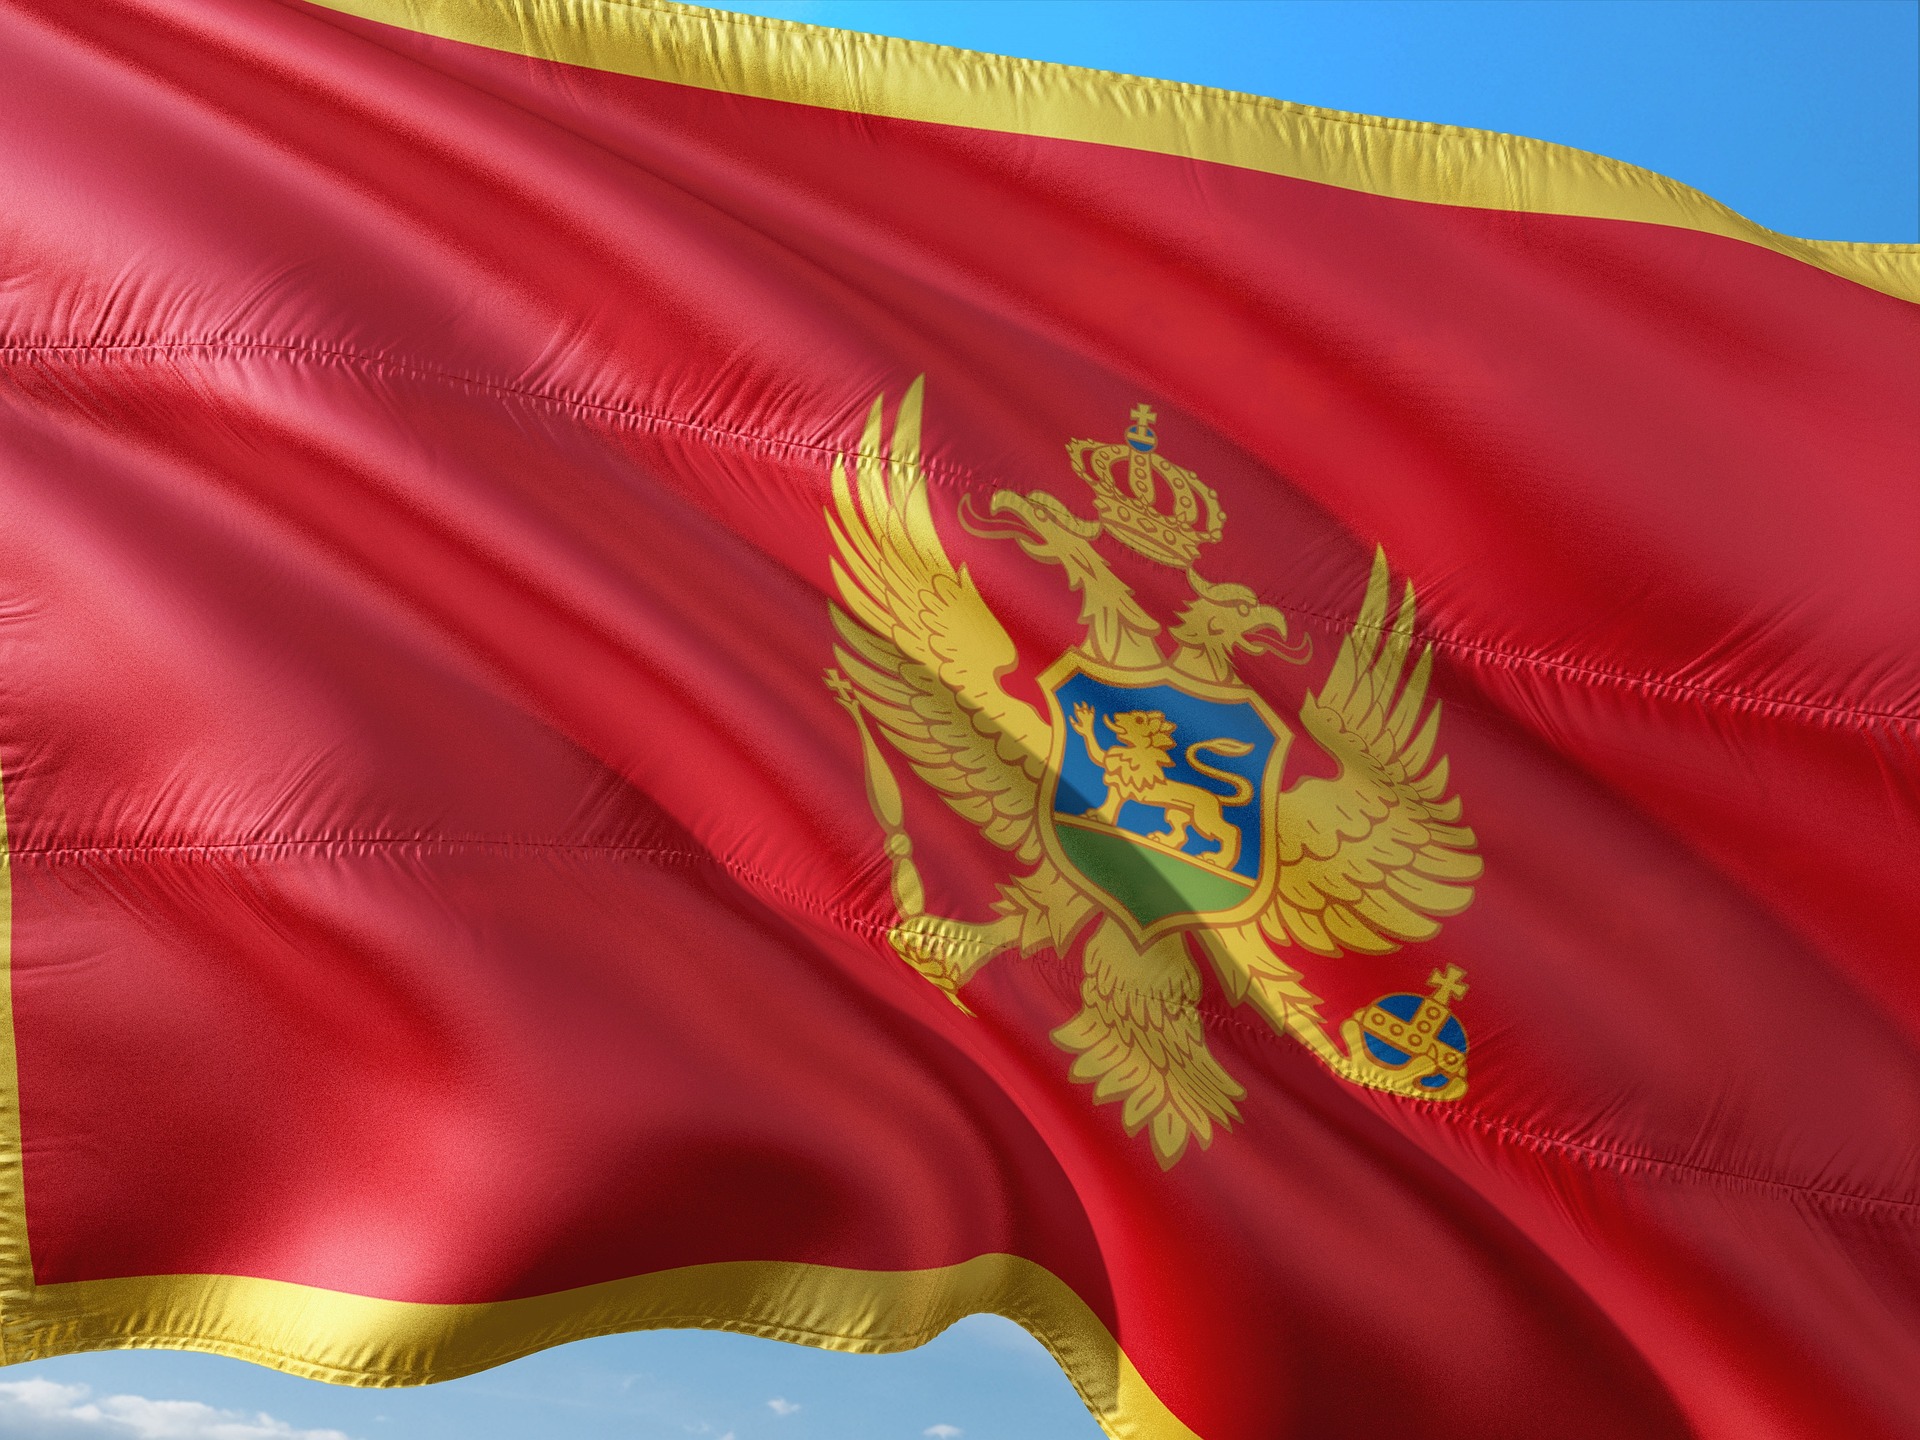 Montenegro in 2023: A New Dawn or New Troubles?